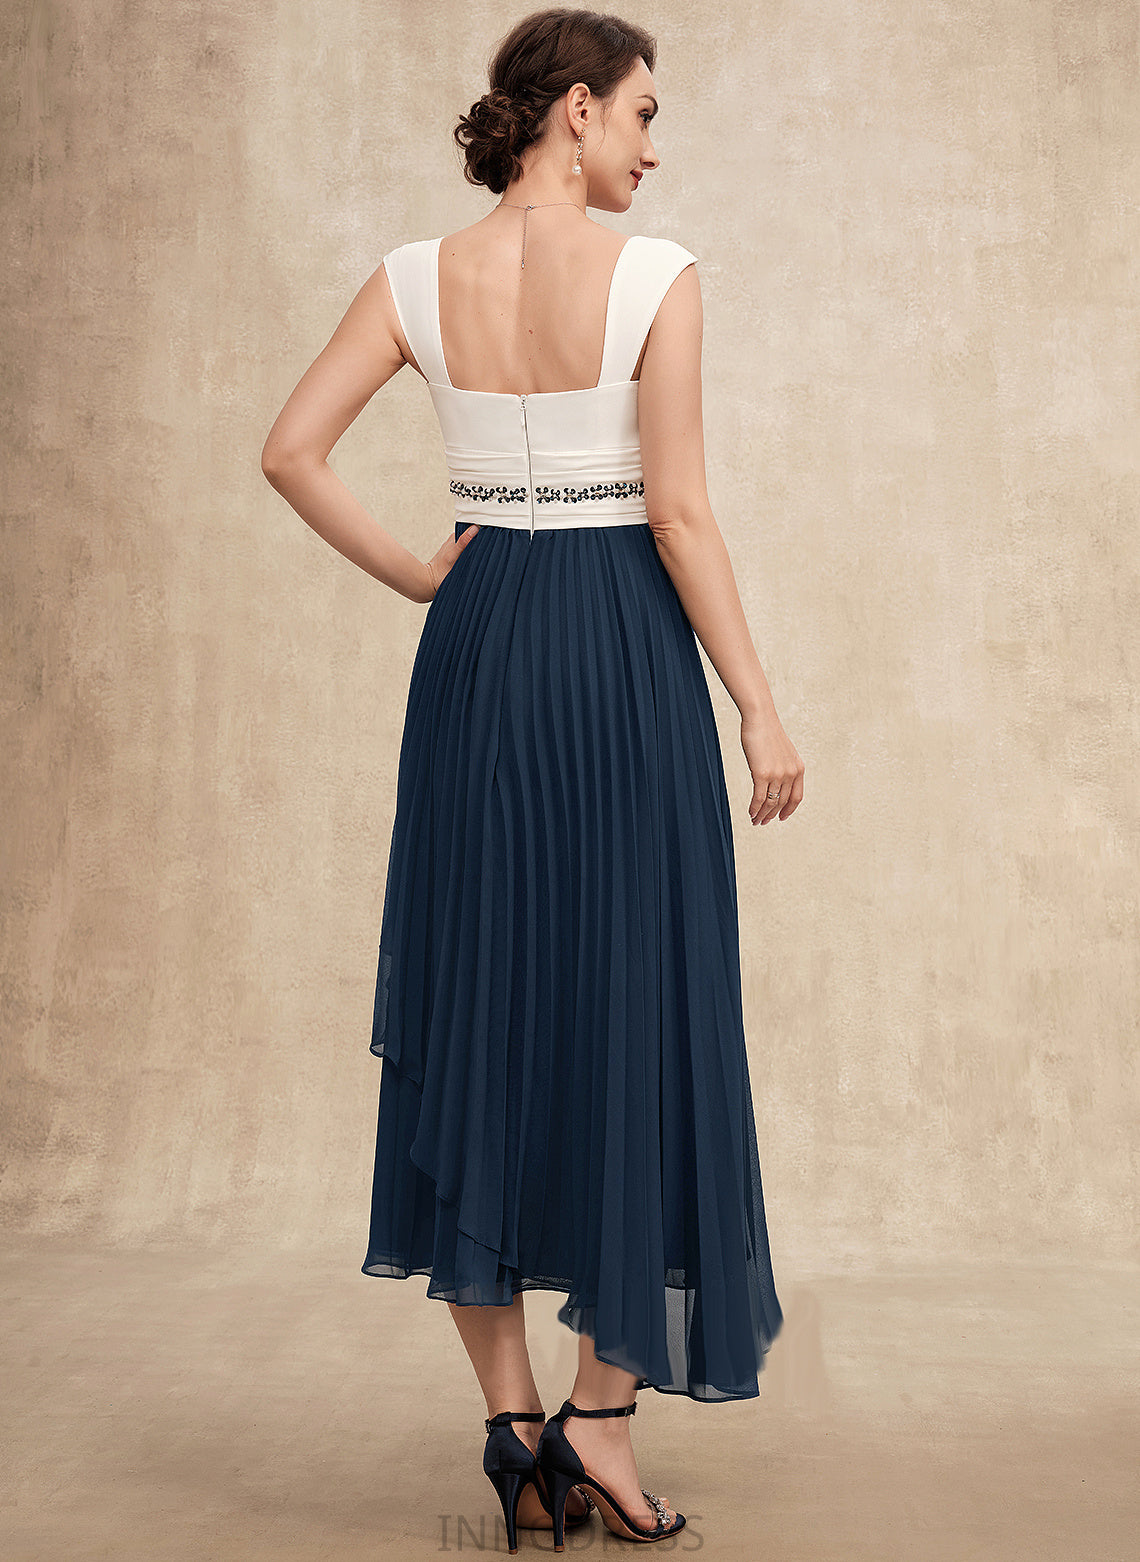 Pleated A-Line of With Beading the Dress Magdalena Square Chiffon Sequins Neckline Mother of the Bride Dresses Mother Tea-Length Bride